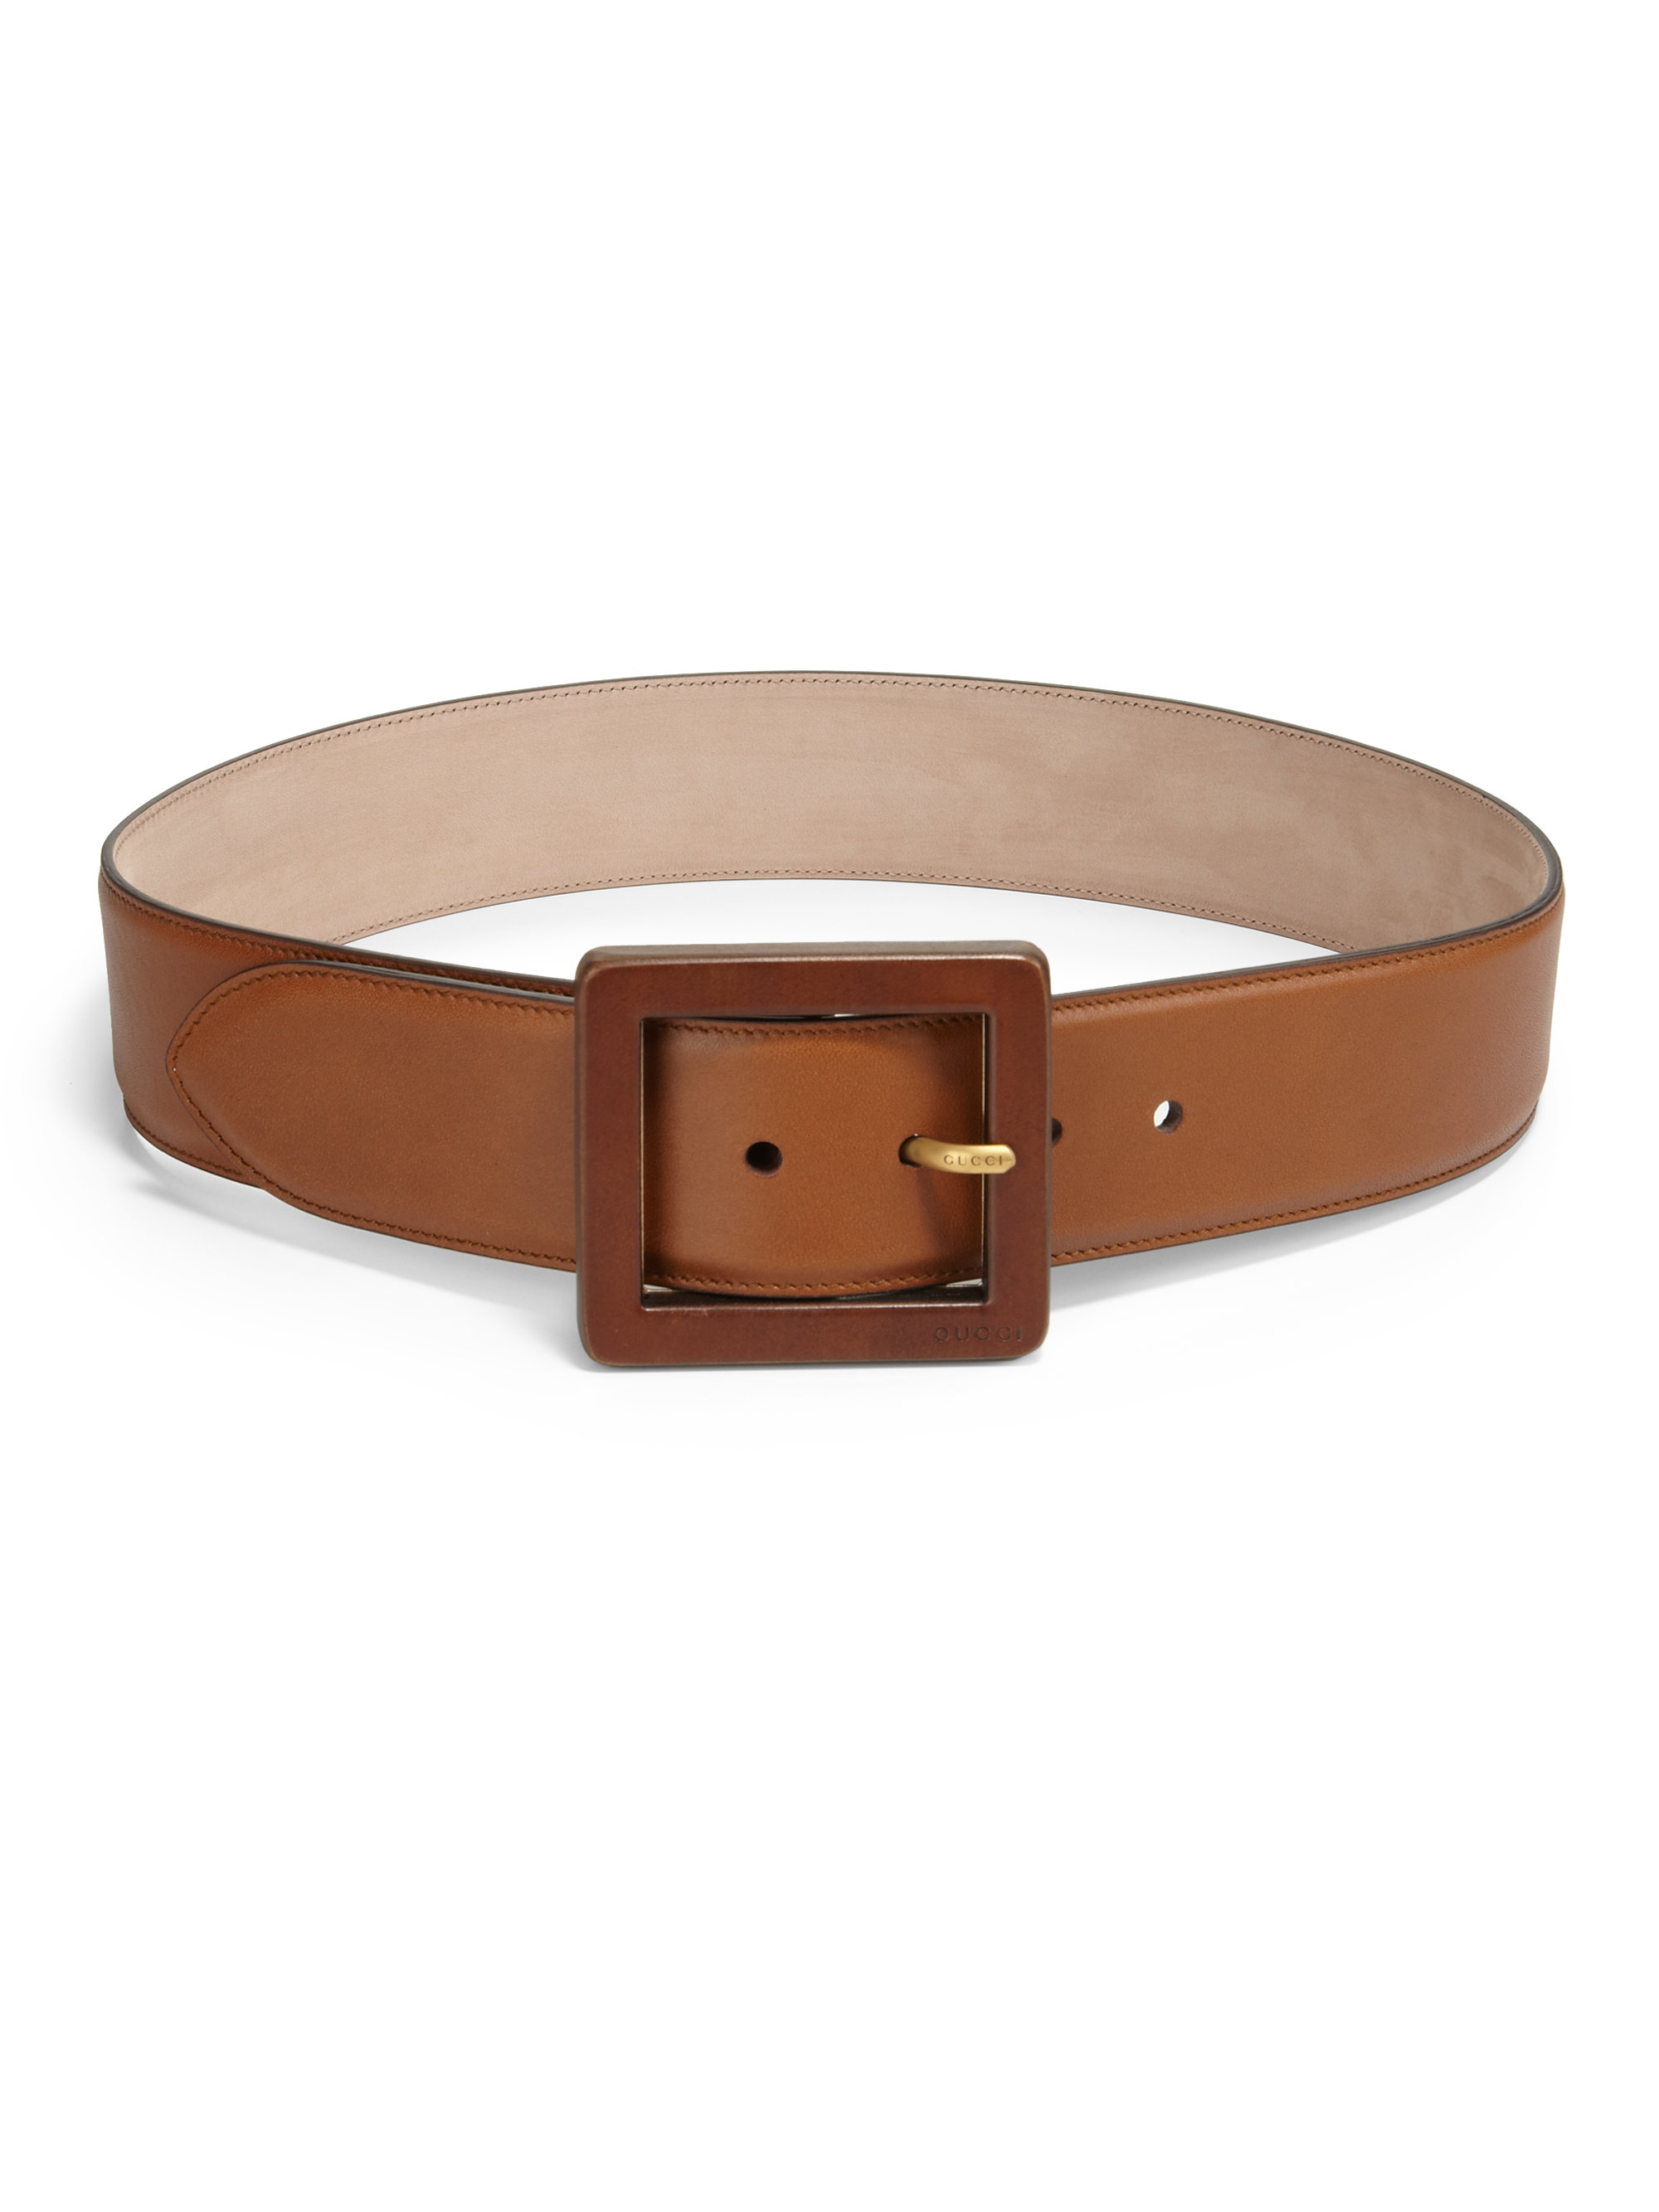 Gucci Wide Leather Belt in Brown - Lyst